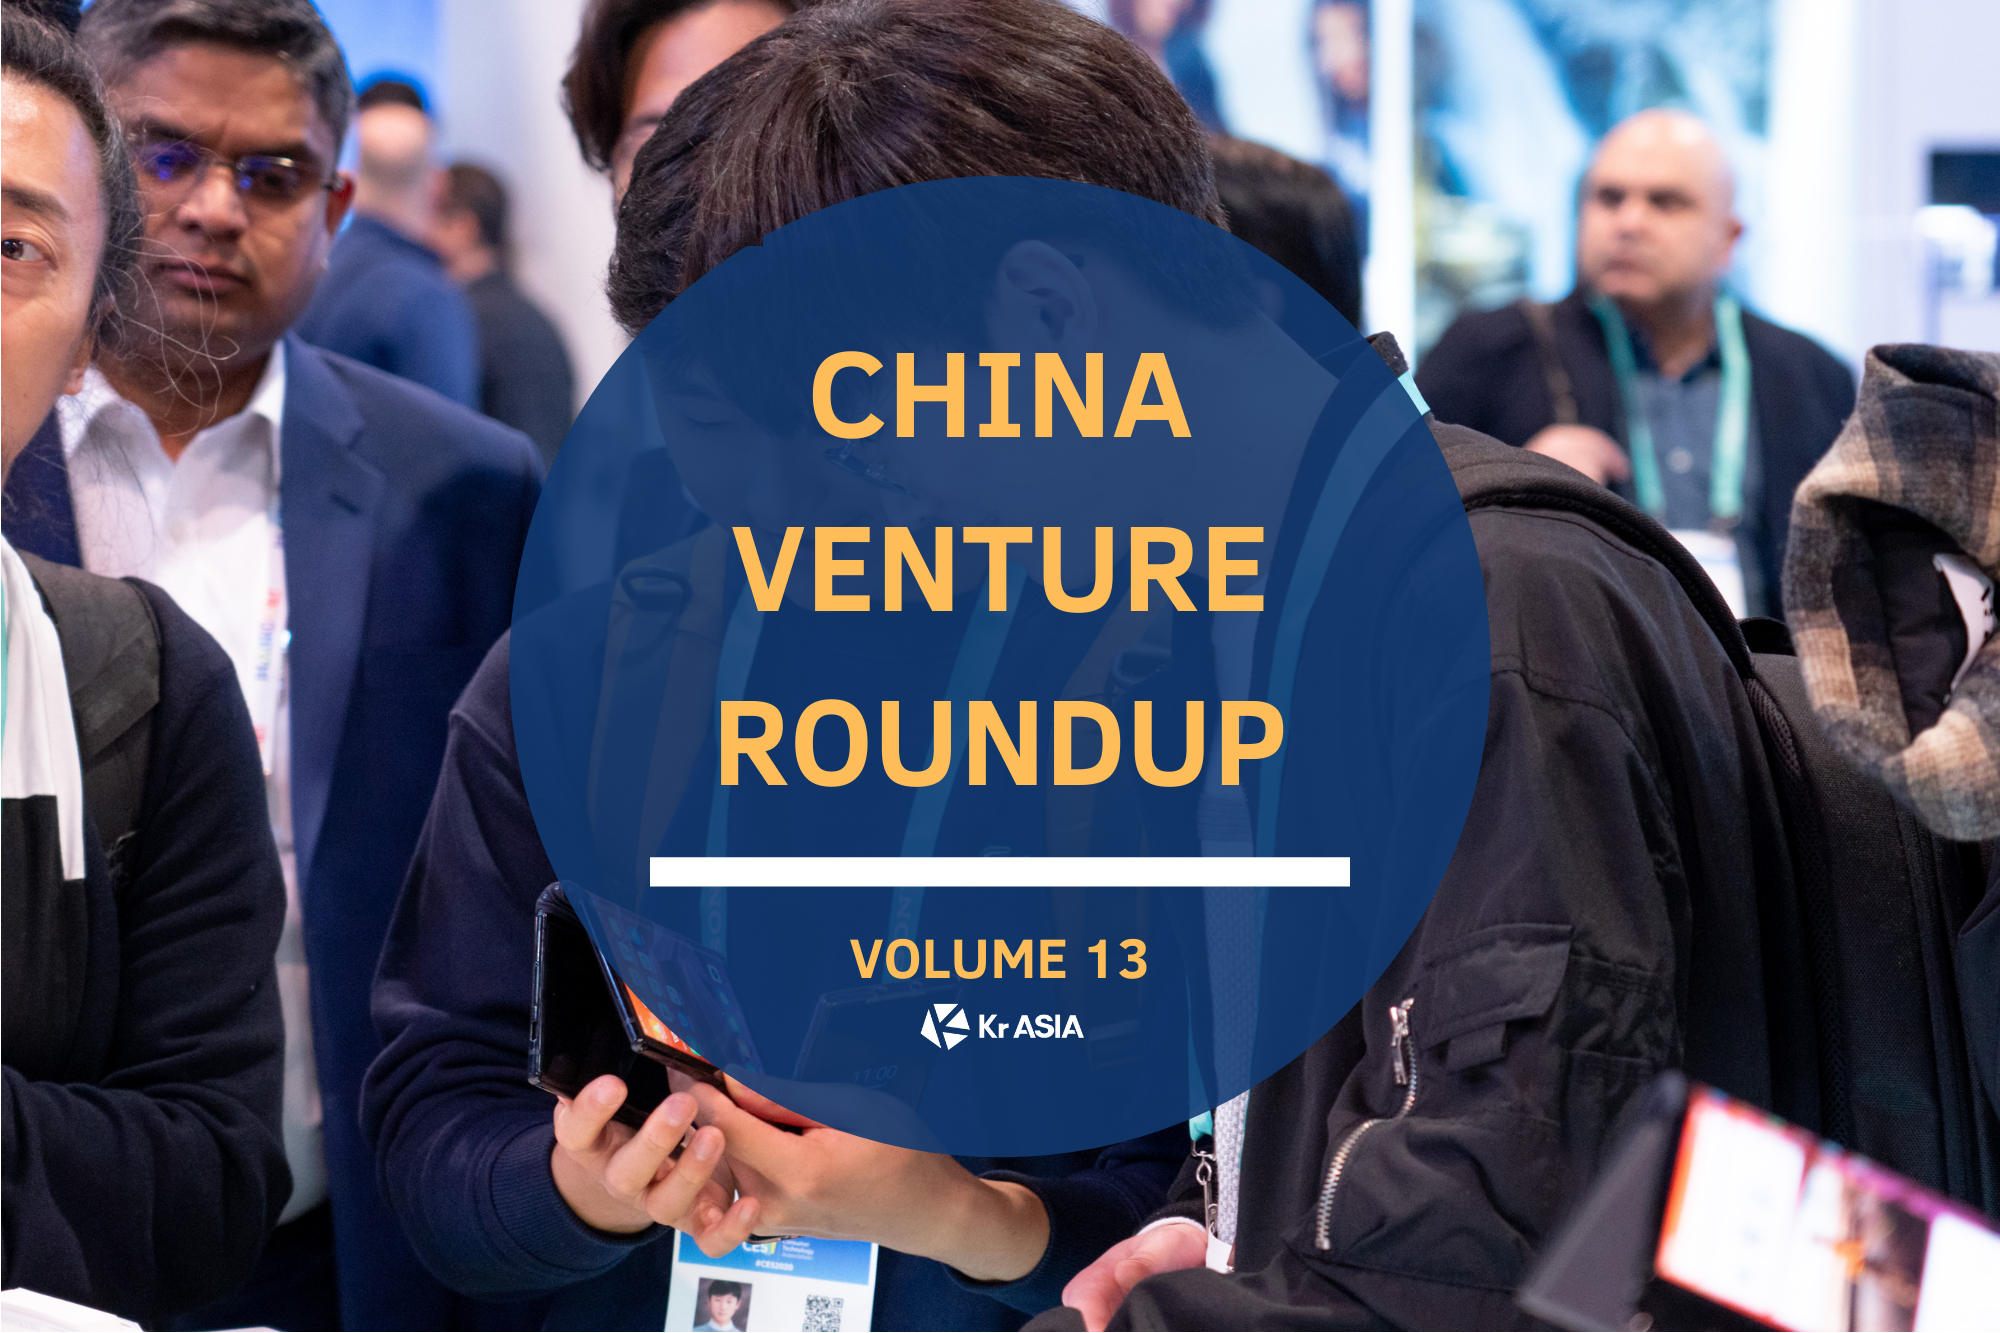 China Venture Roundup Volume 13 | Maker of world’s thinnest foldable display to raise USD 1 billion in IPO